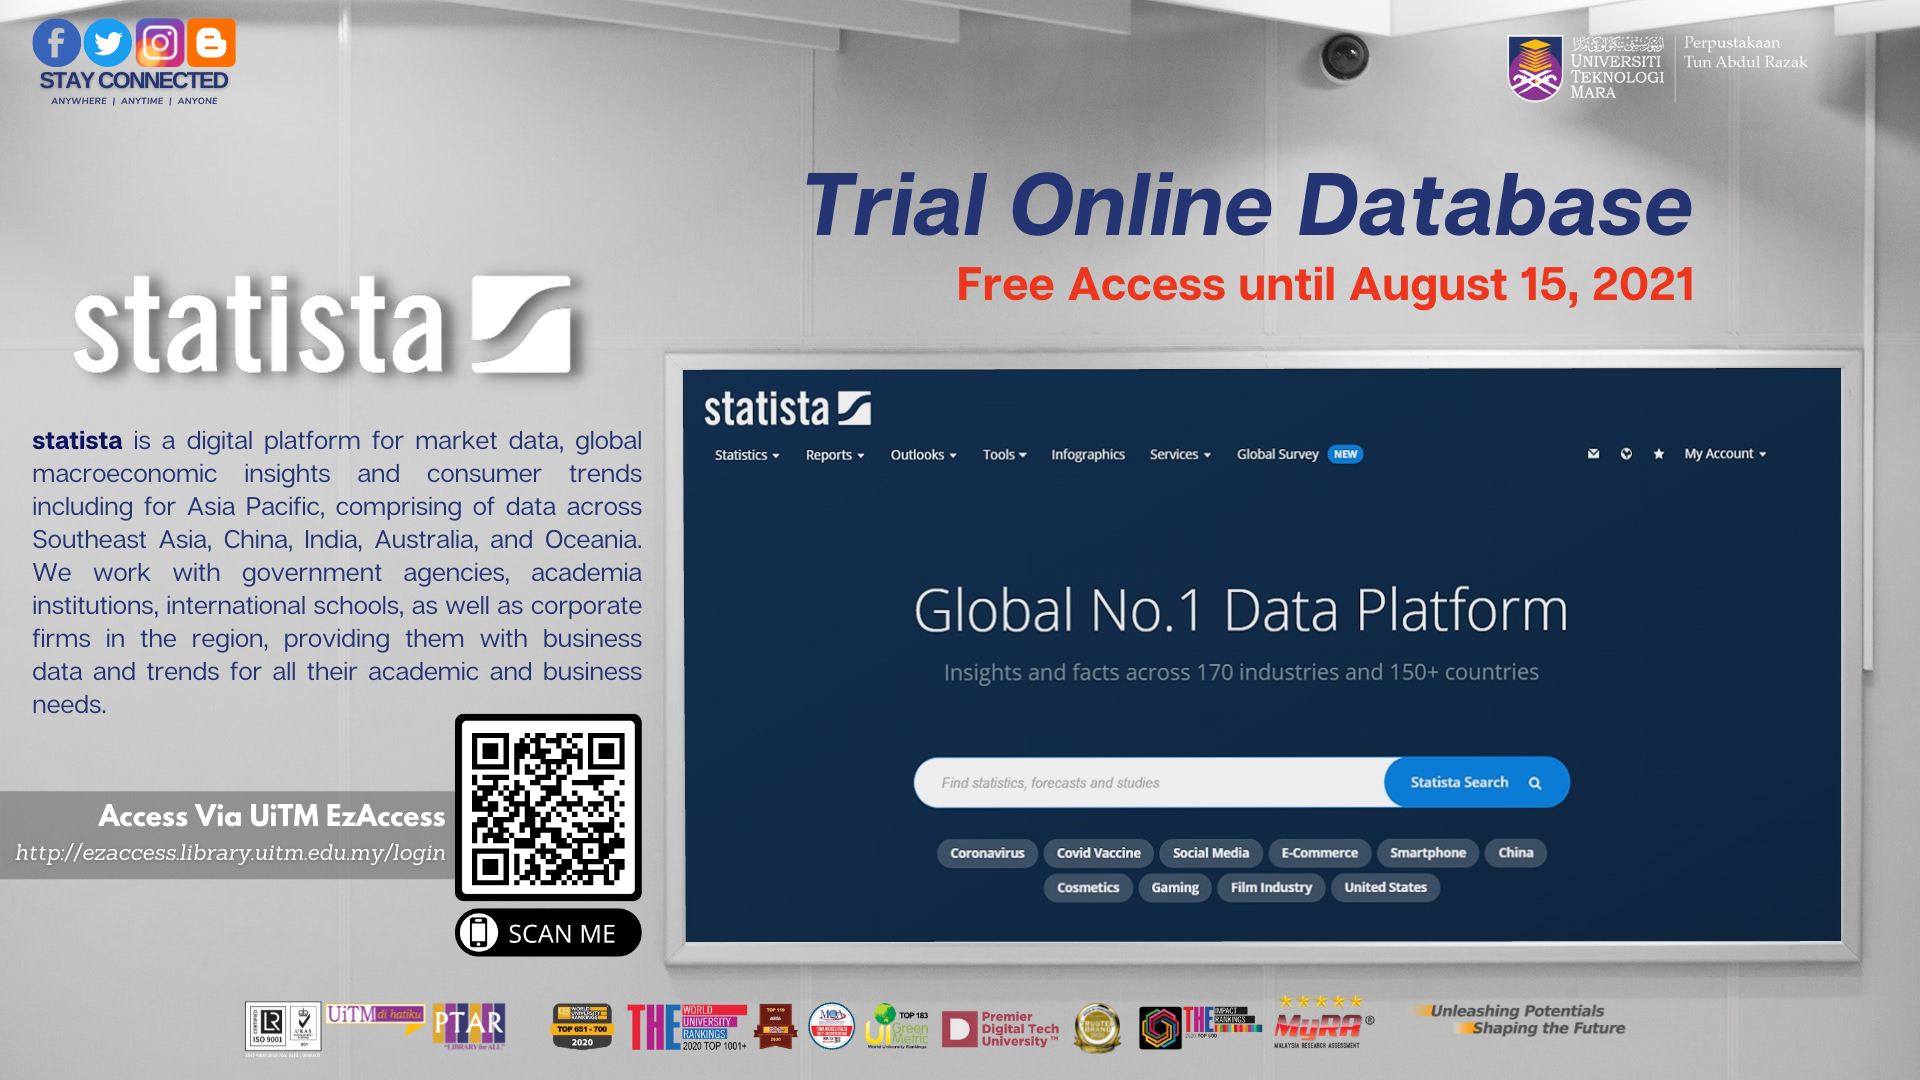 Trial Online Database - statista (Free Access until August 15, 2021